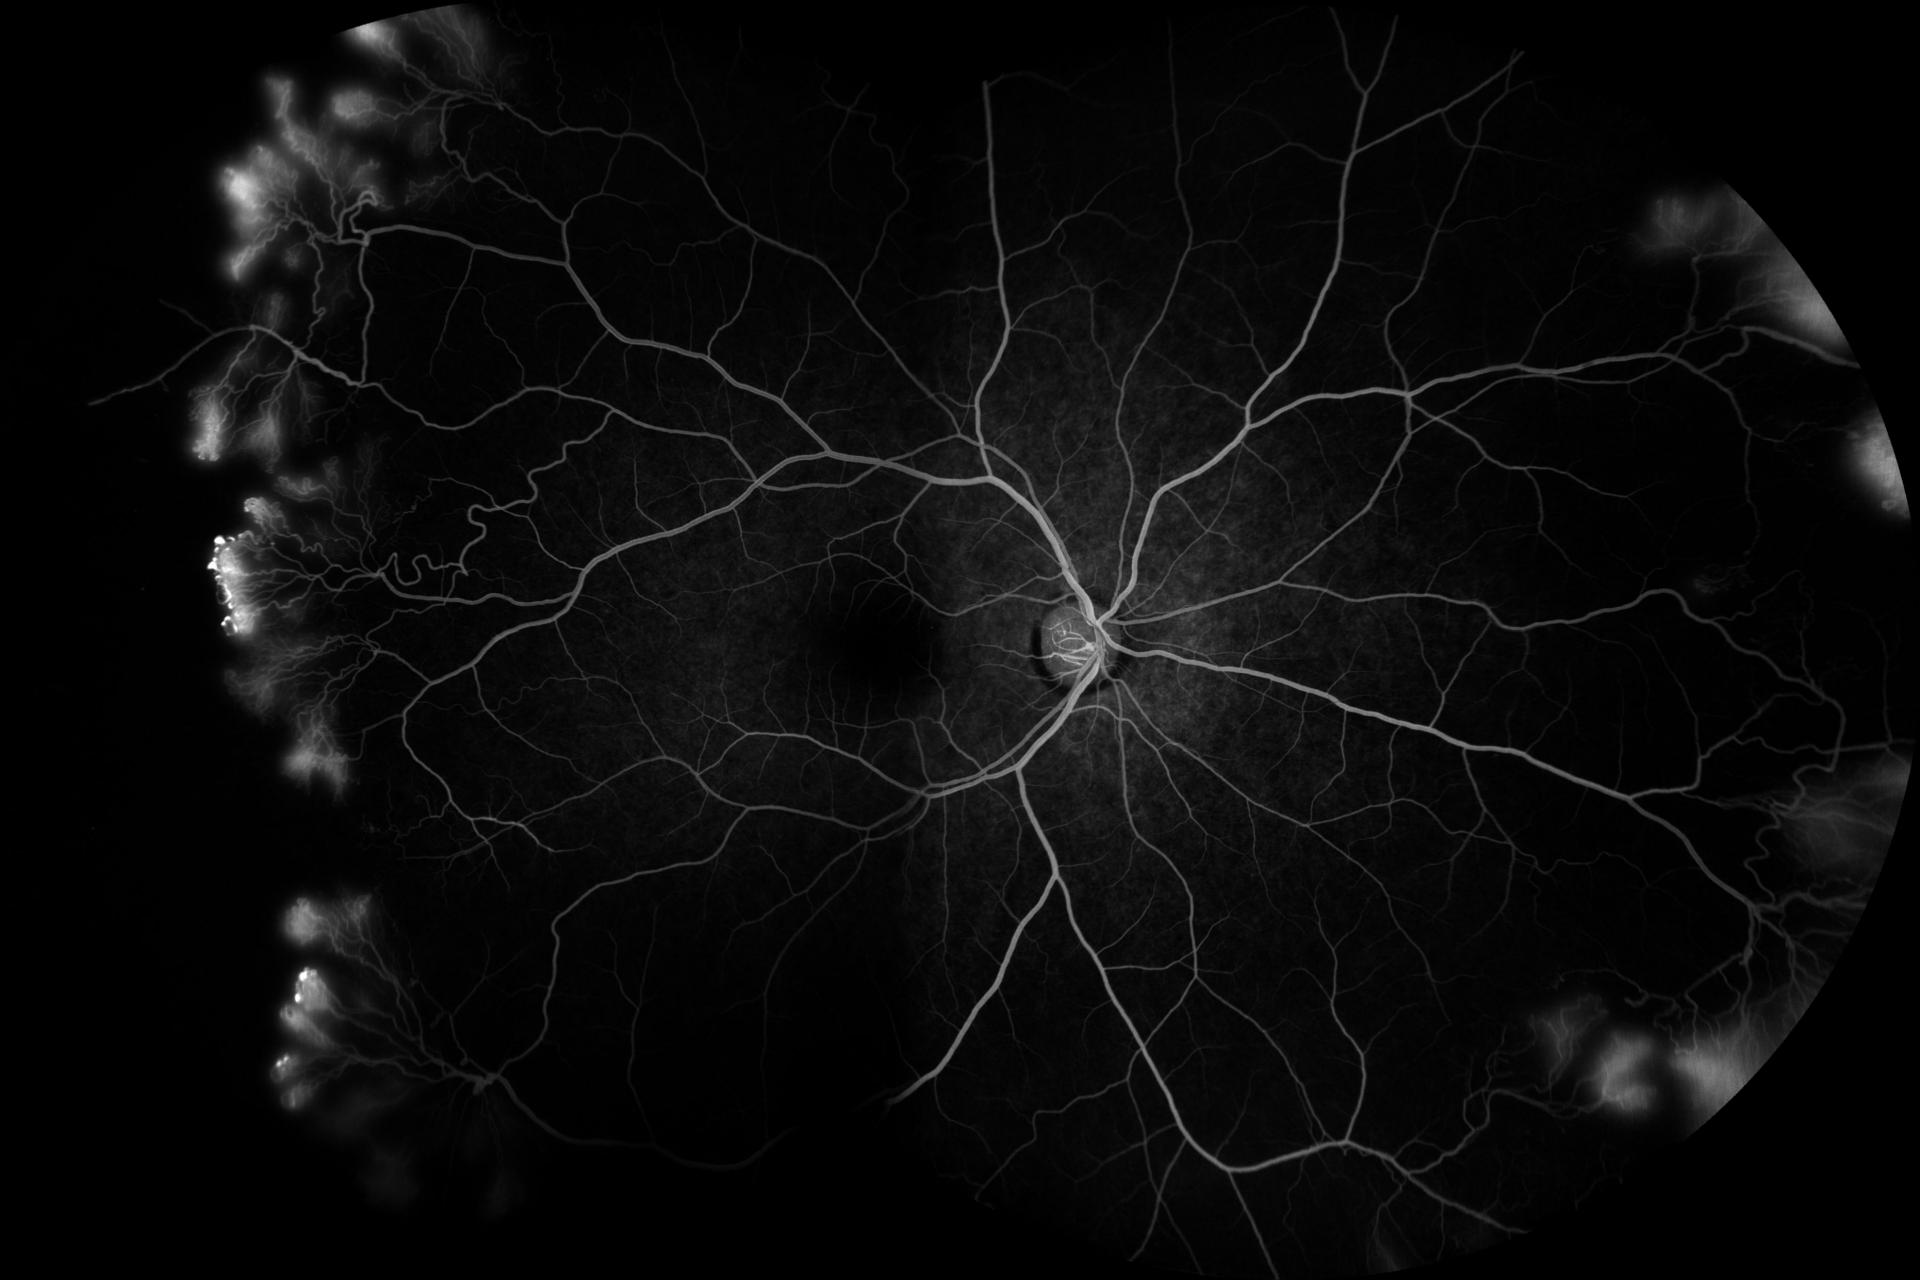 Fluorescein angiography reveals extensive sea-fan neovascularization in the peripheral retina